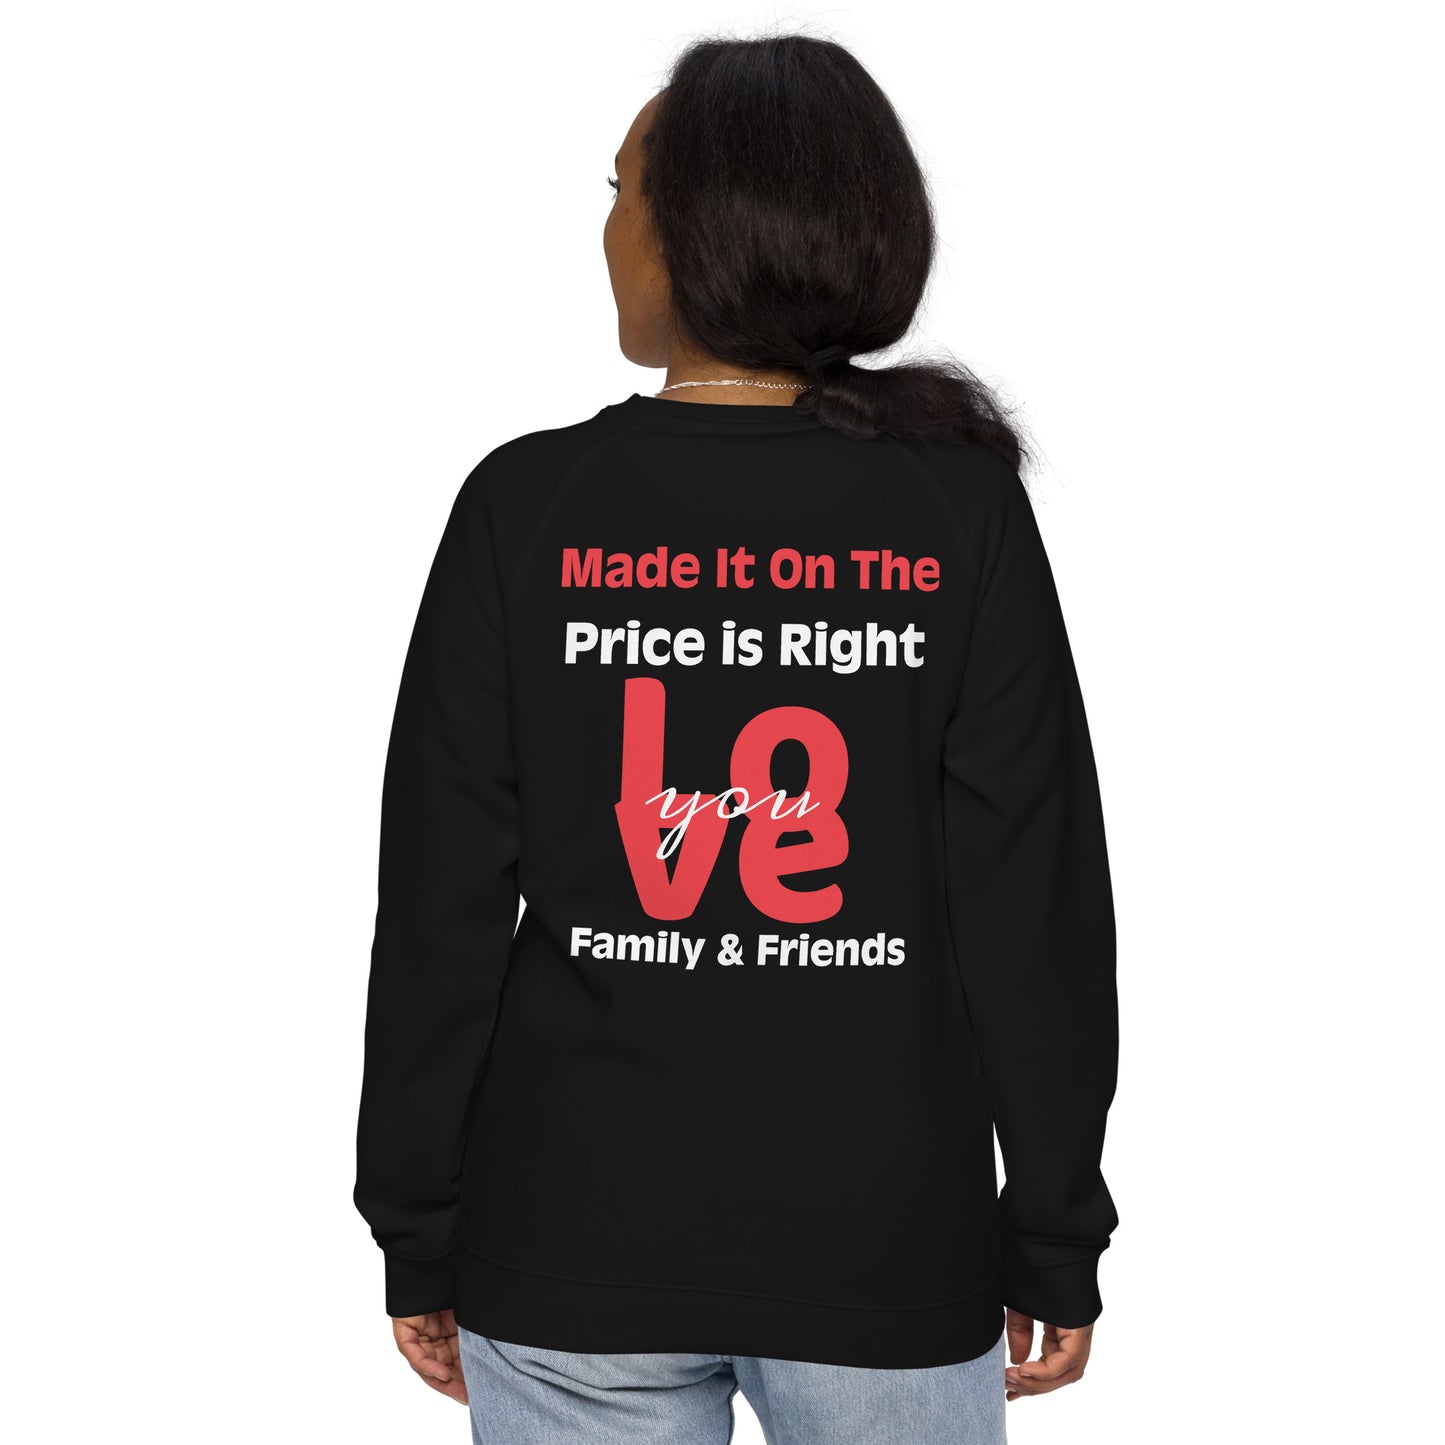 Unisex organic raglan sweatshirt - The Price Is Right - Spin The Wheel on Front -  Greeting to Family & Friends on Back